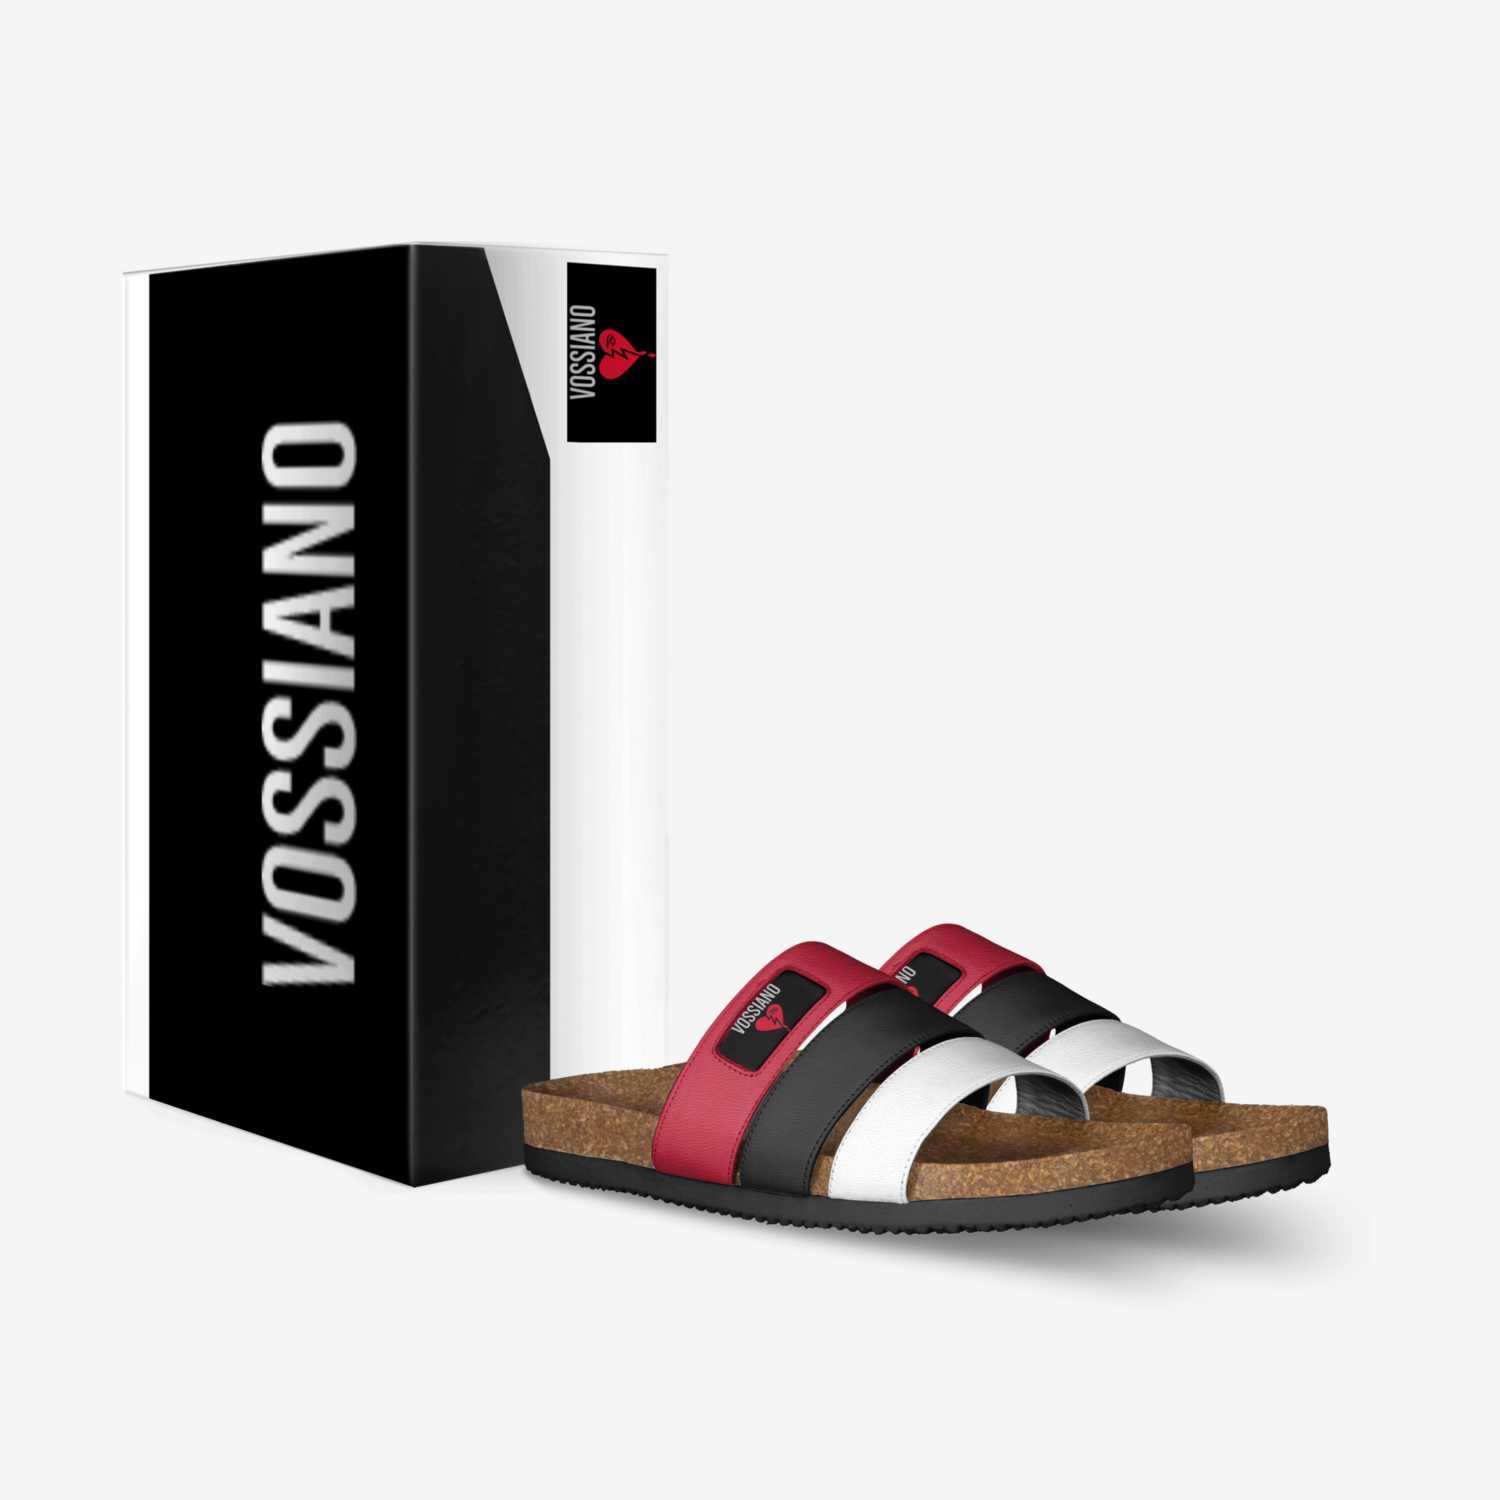 VossianoSamé custom made in Italy shoes by Voris S Johnson | Box view